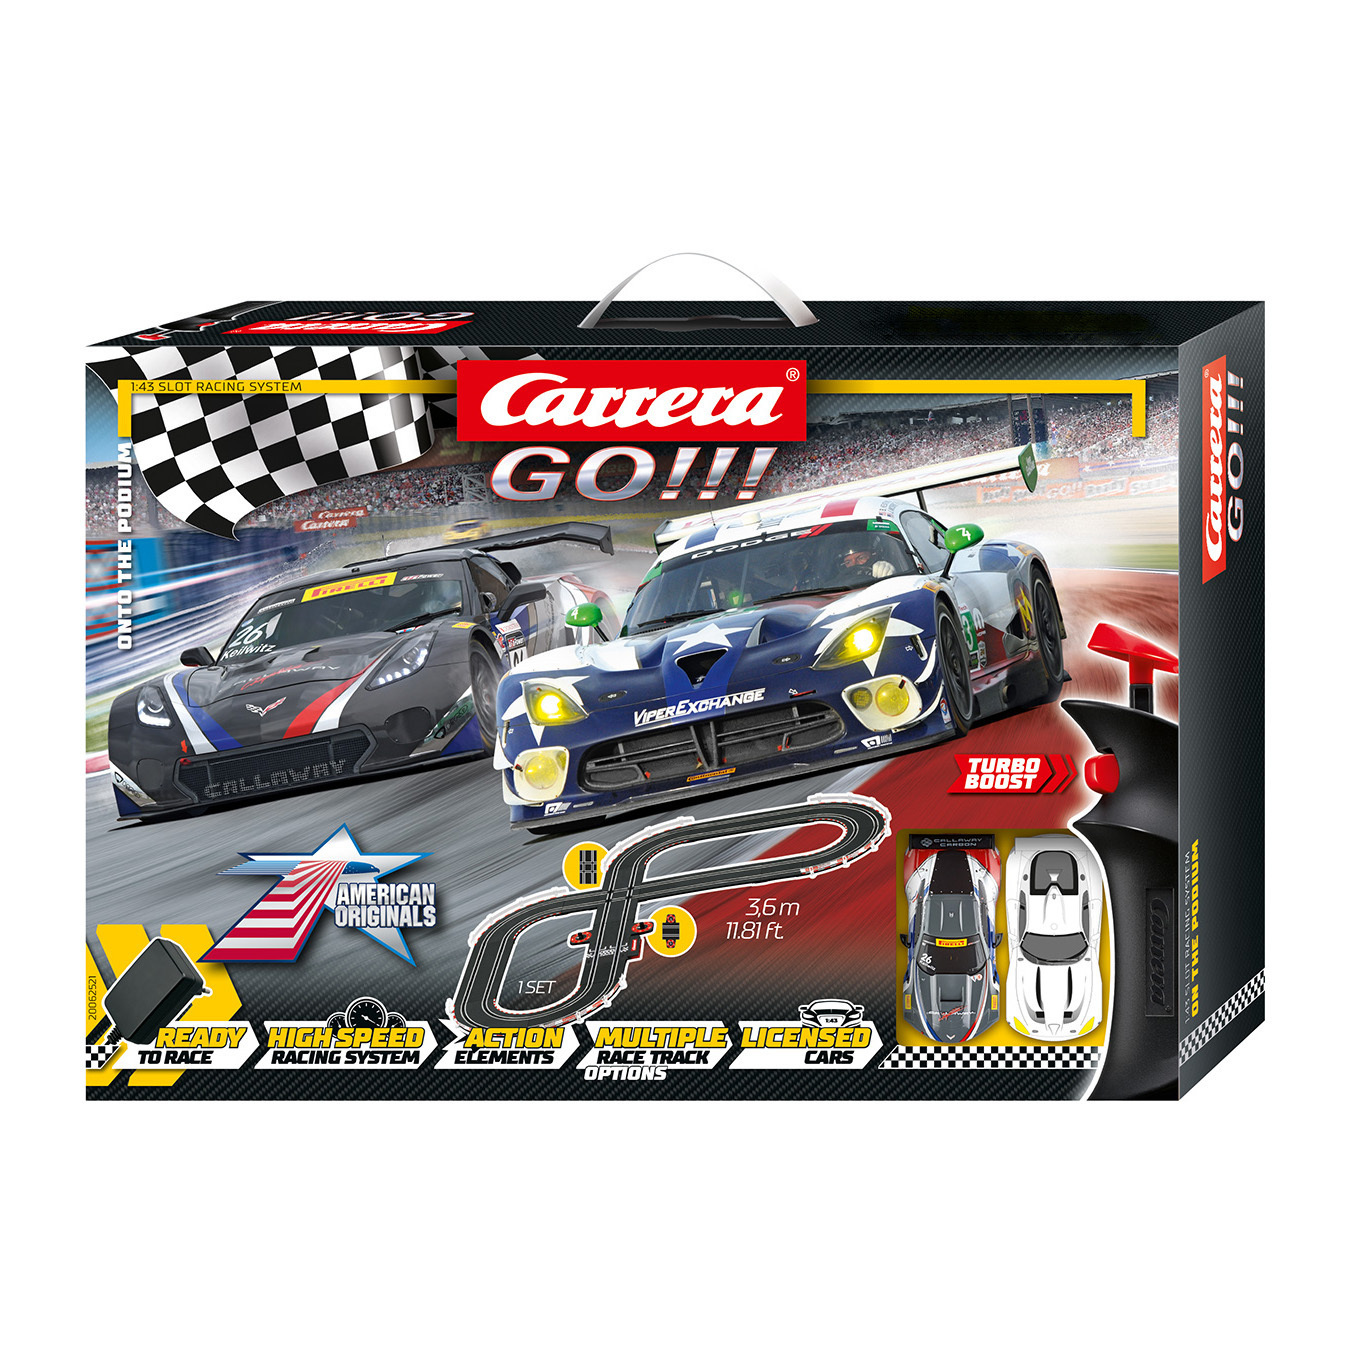 Carrera GO Red Victory 1:43 Scale Slot Car Race Set with Turbo Booster 